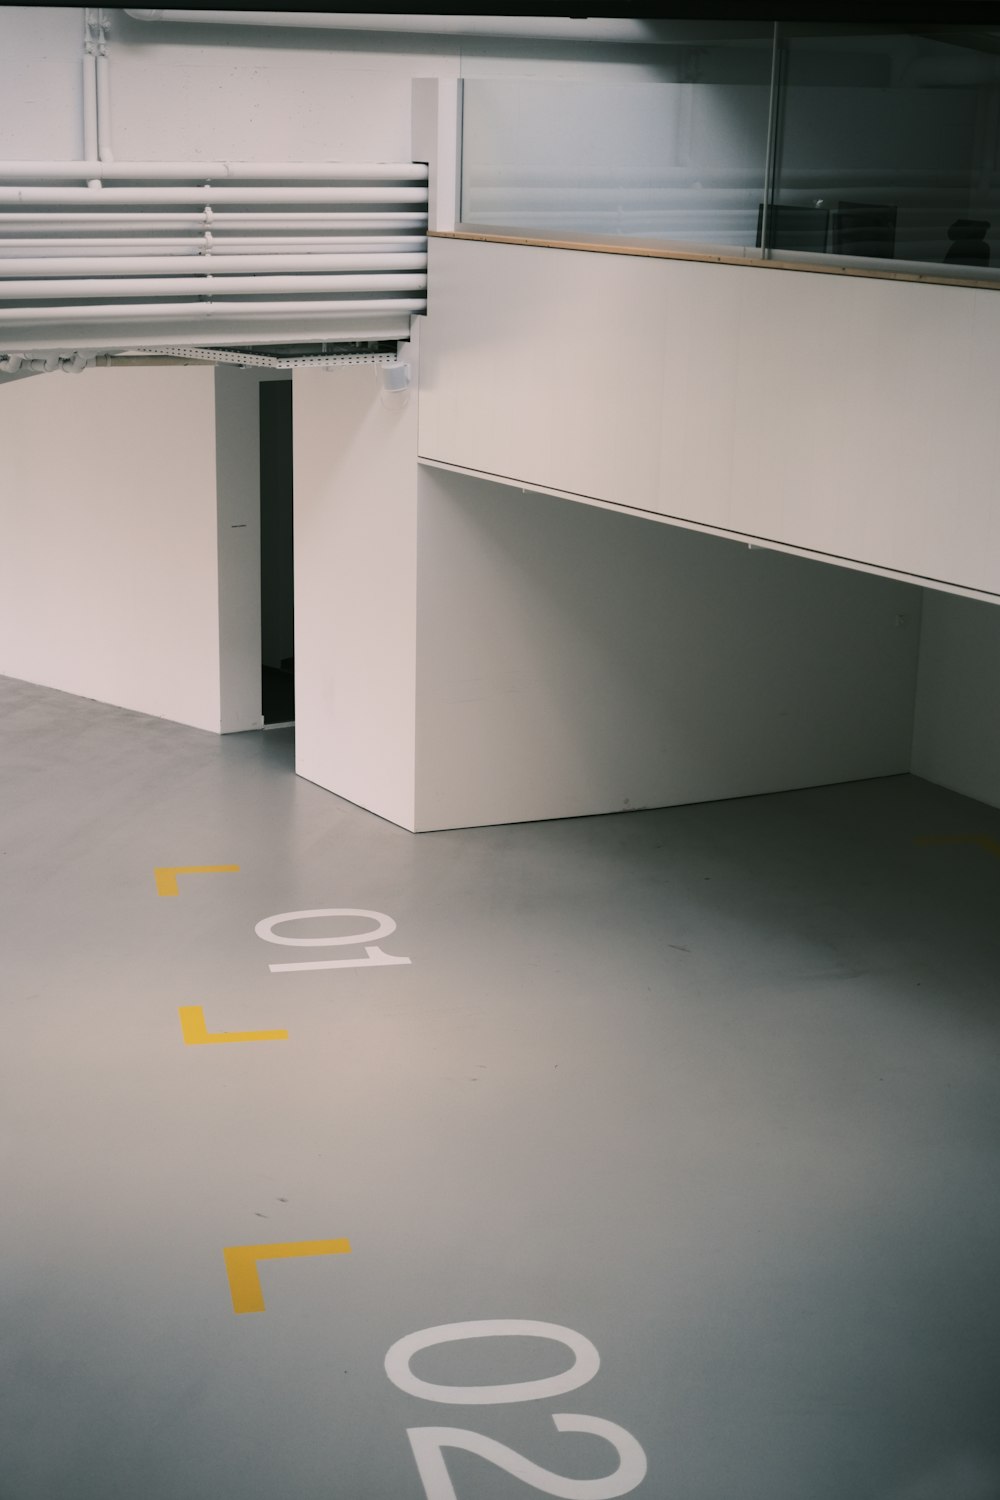 a parking garage with yellow and white markings on the floor